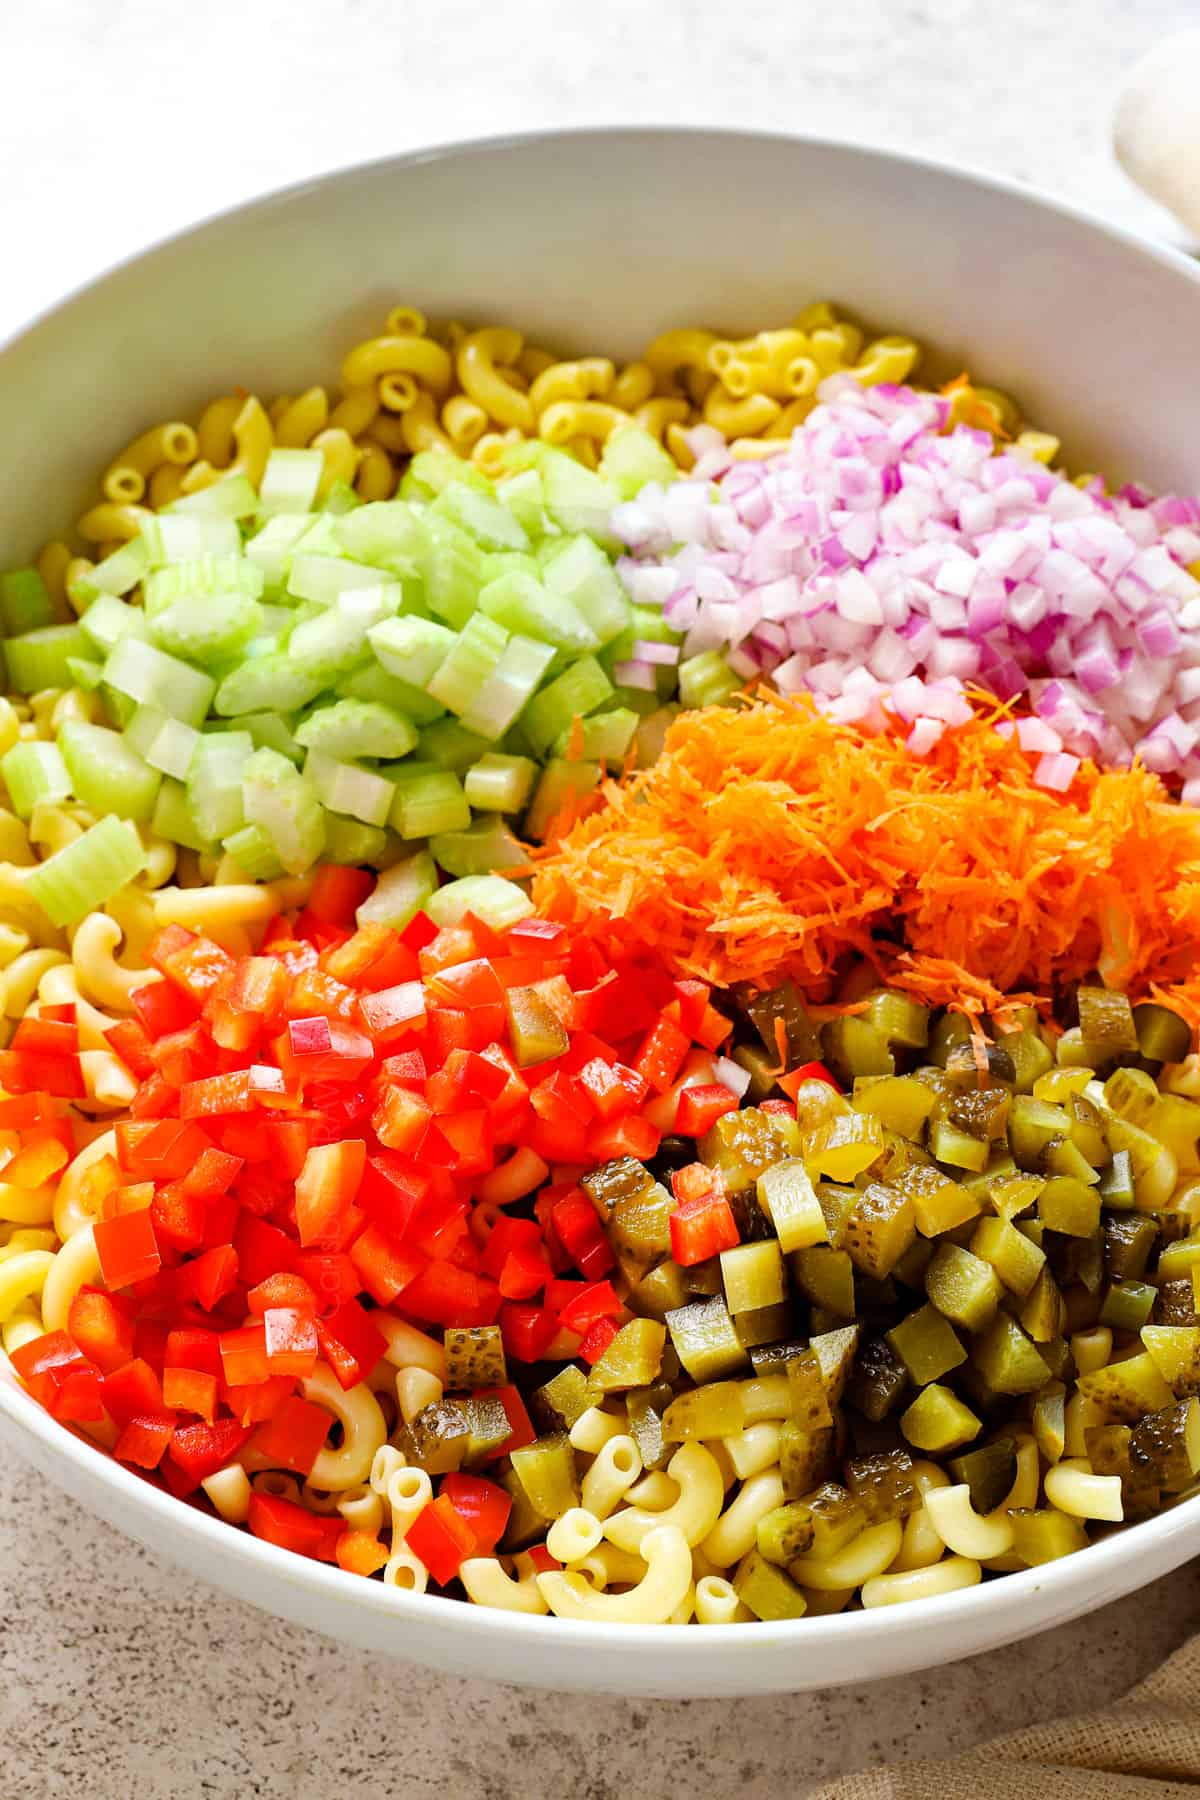 showing how to make Macaroni Salad by adding celery, bell peppers, pickles, shredded carrots and red onions to a bowl